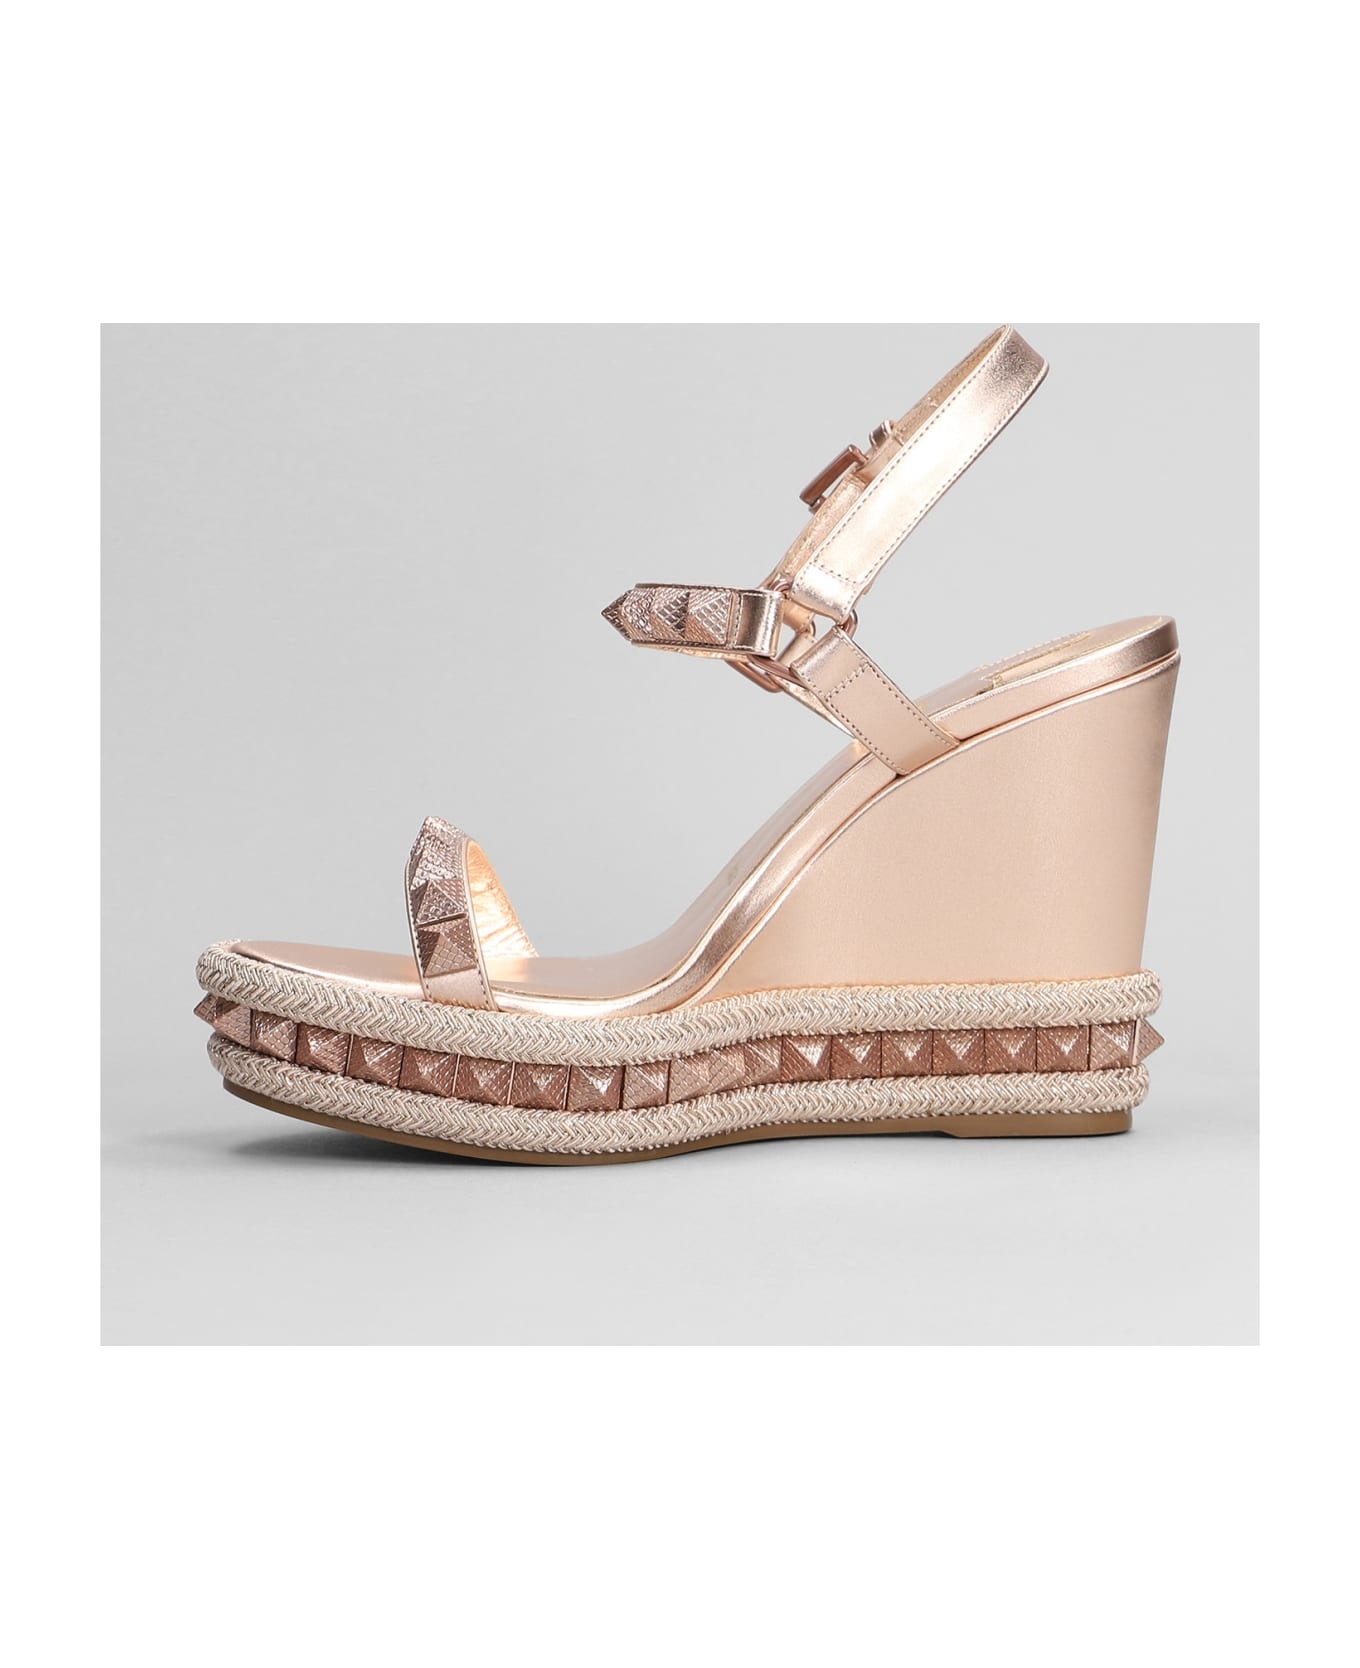 Pyraclou 110 Sandals In Rose-pink Leather - 3